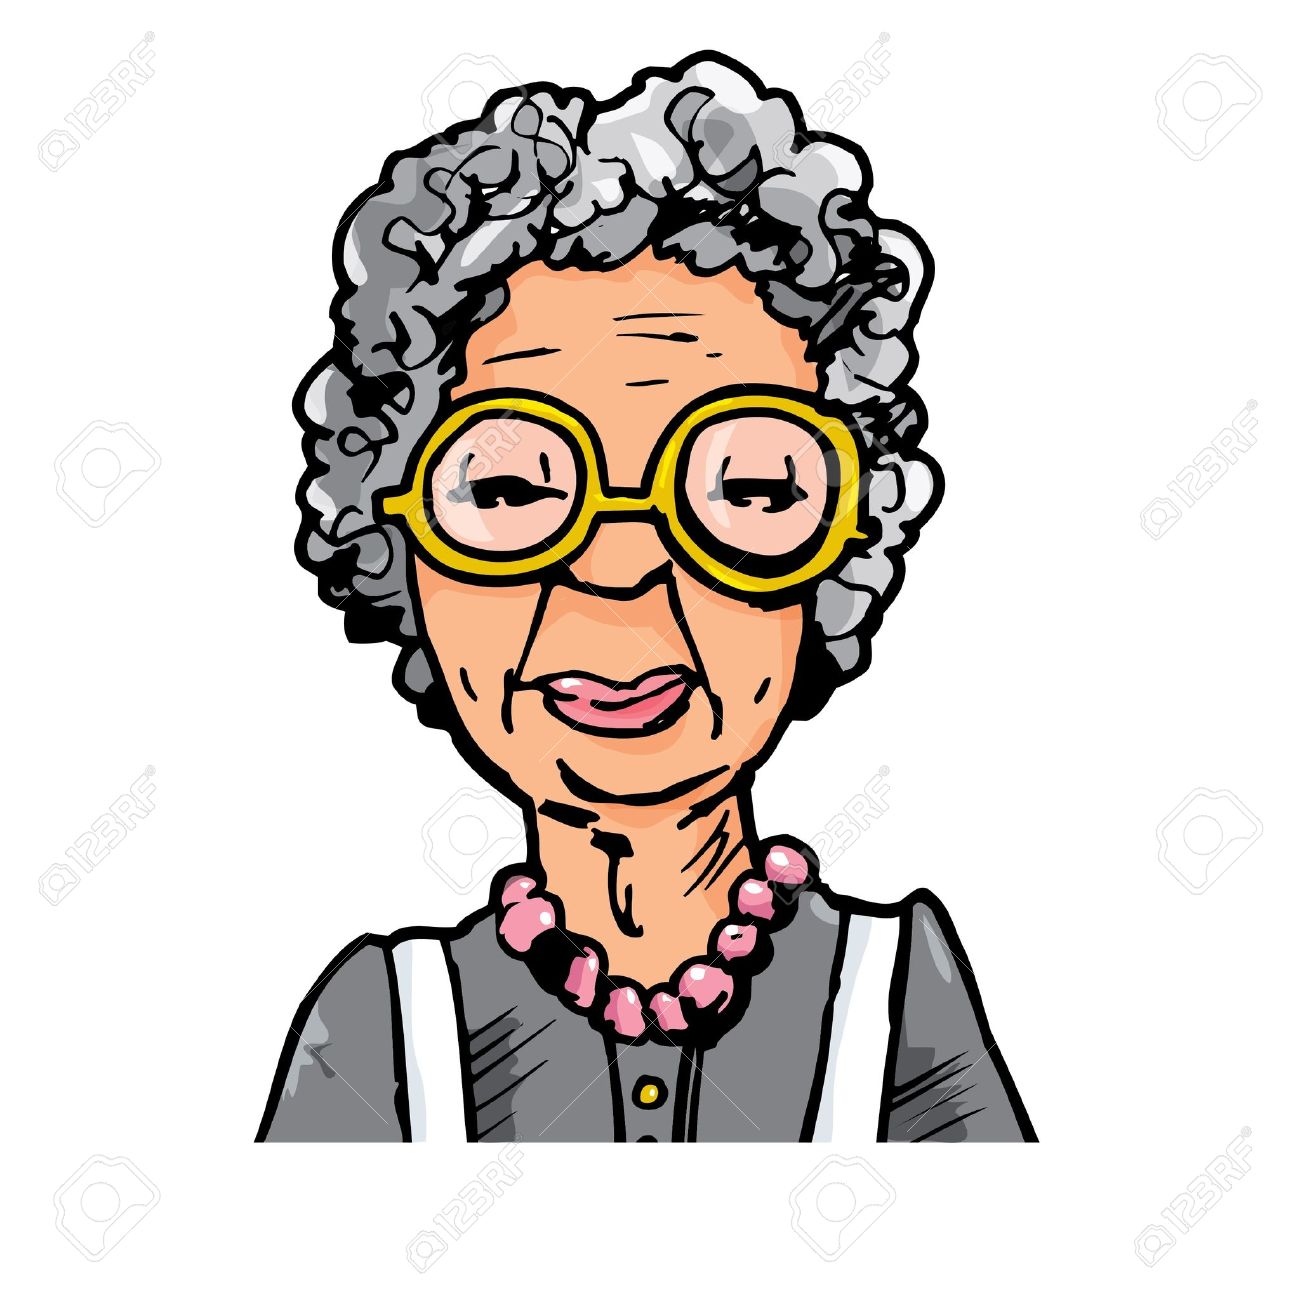 old woman: Cartoon of an old .